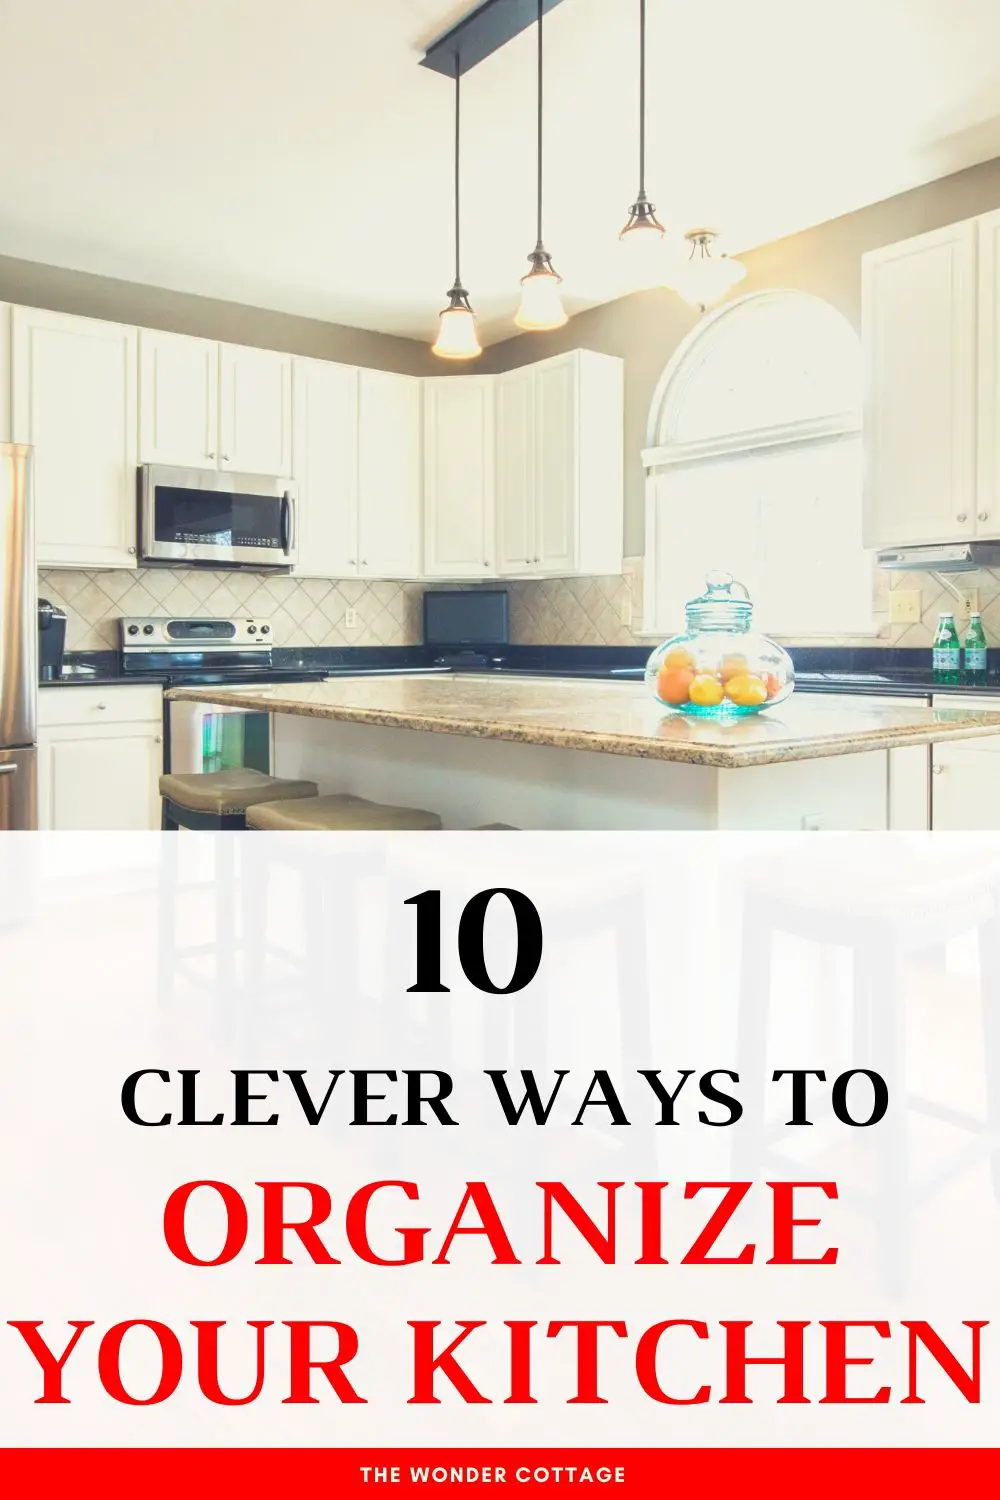 10 clever ways to organize your kitchen